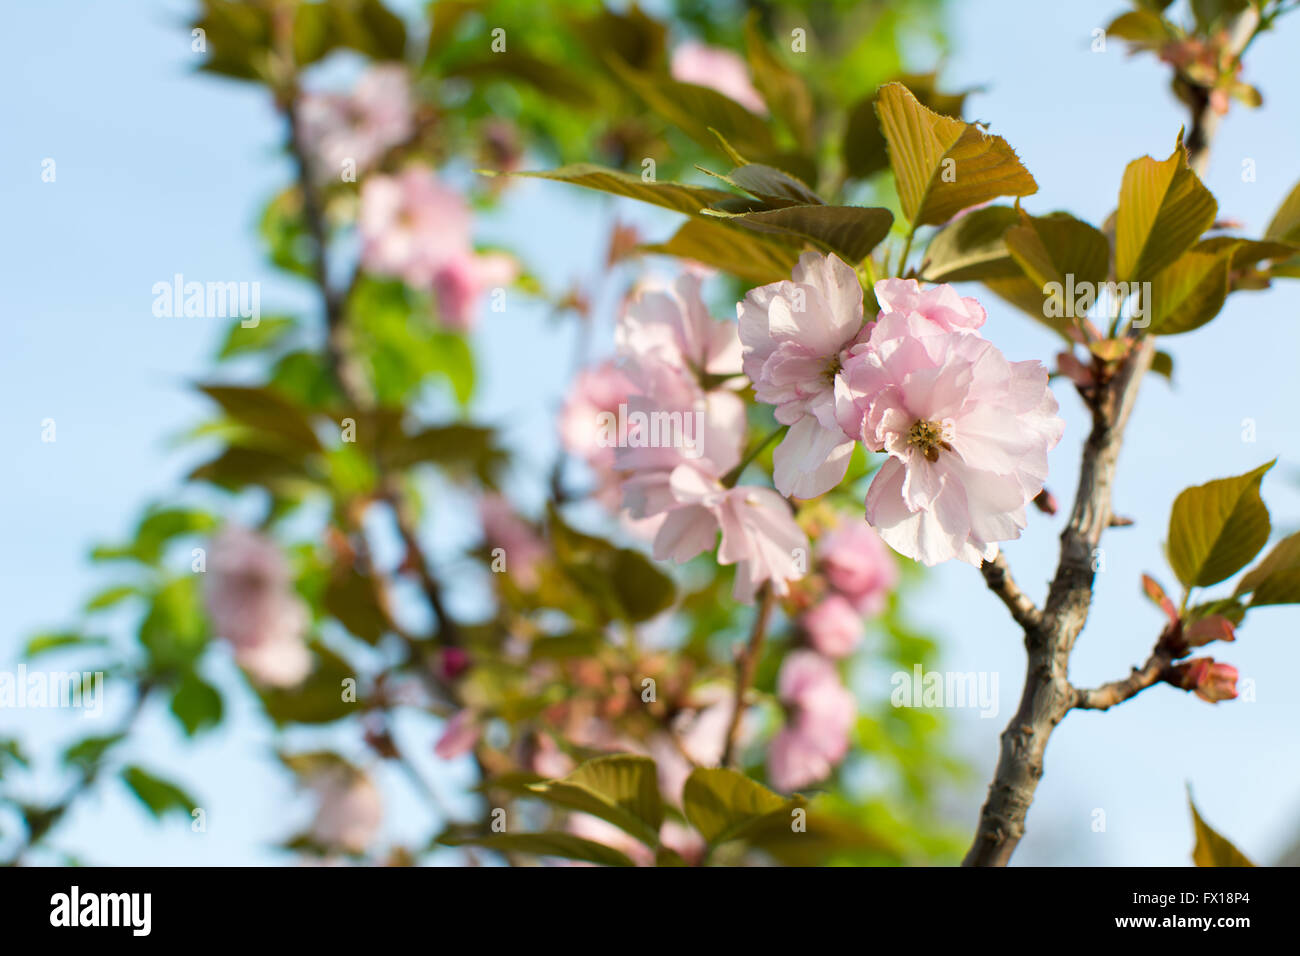 Cherry blossom flowers on a tree outdoors Stock Photo